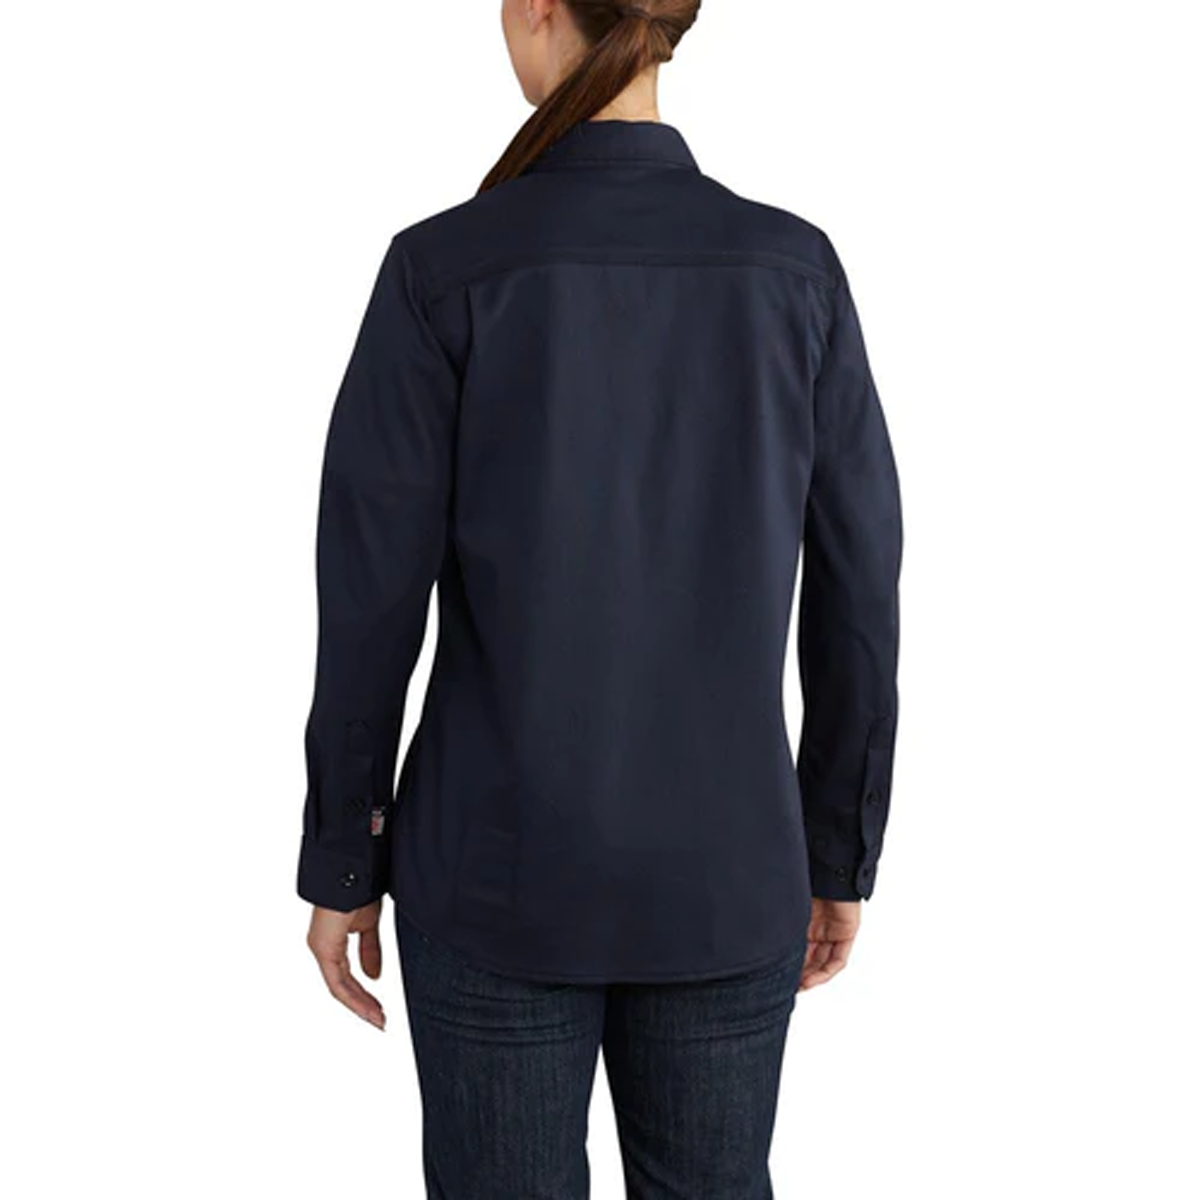 CARHARTT LADIES FLAME RESISTANT RELAXED FIT RUGGED FLEX TWILL SHIRT